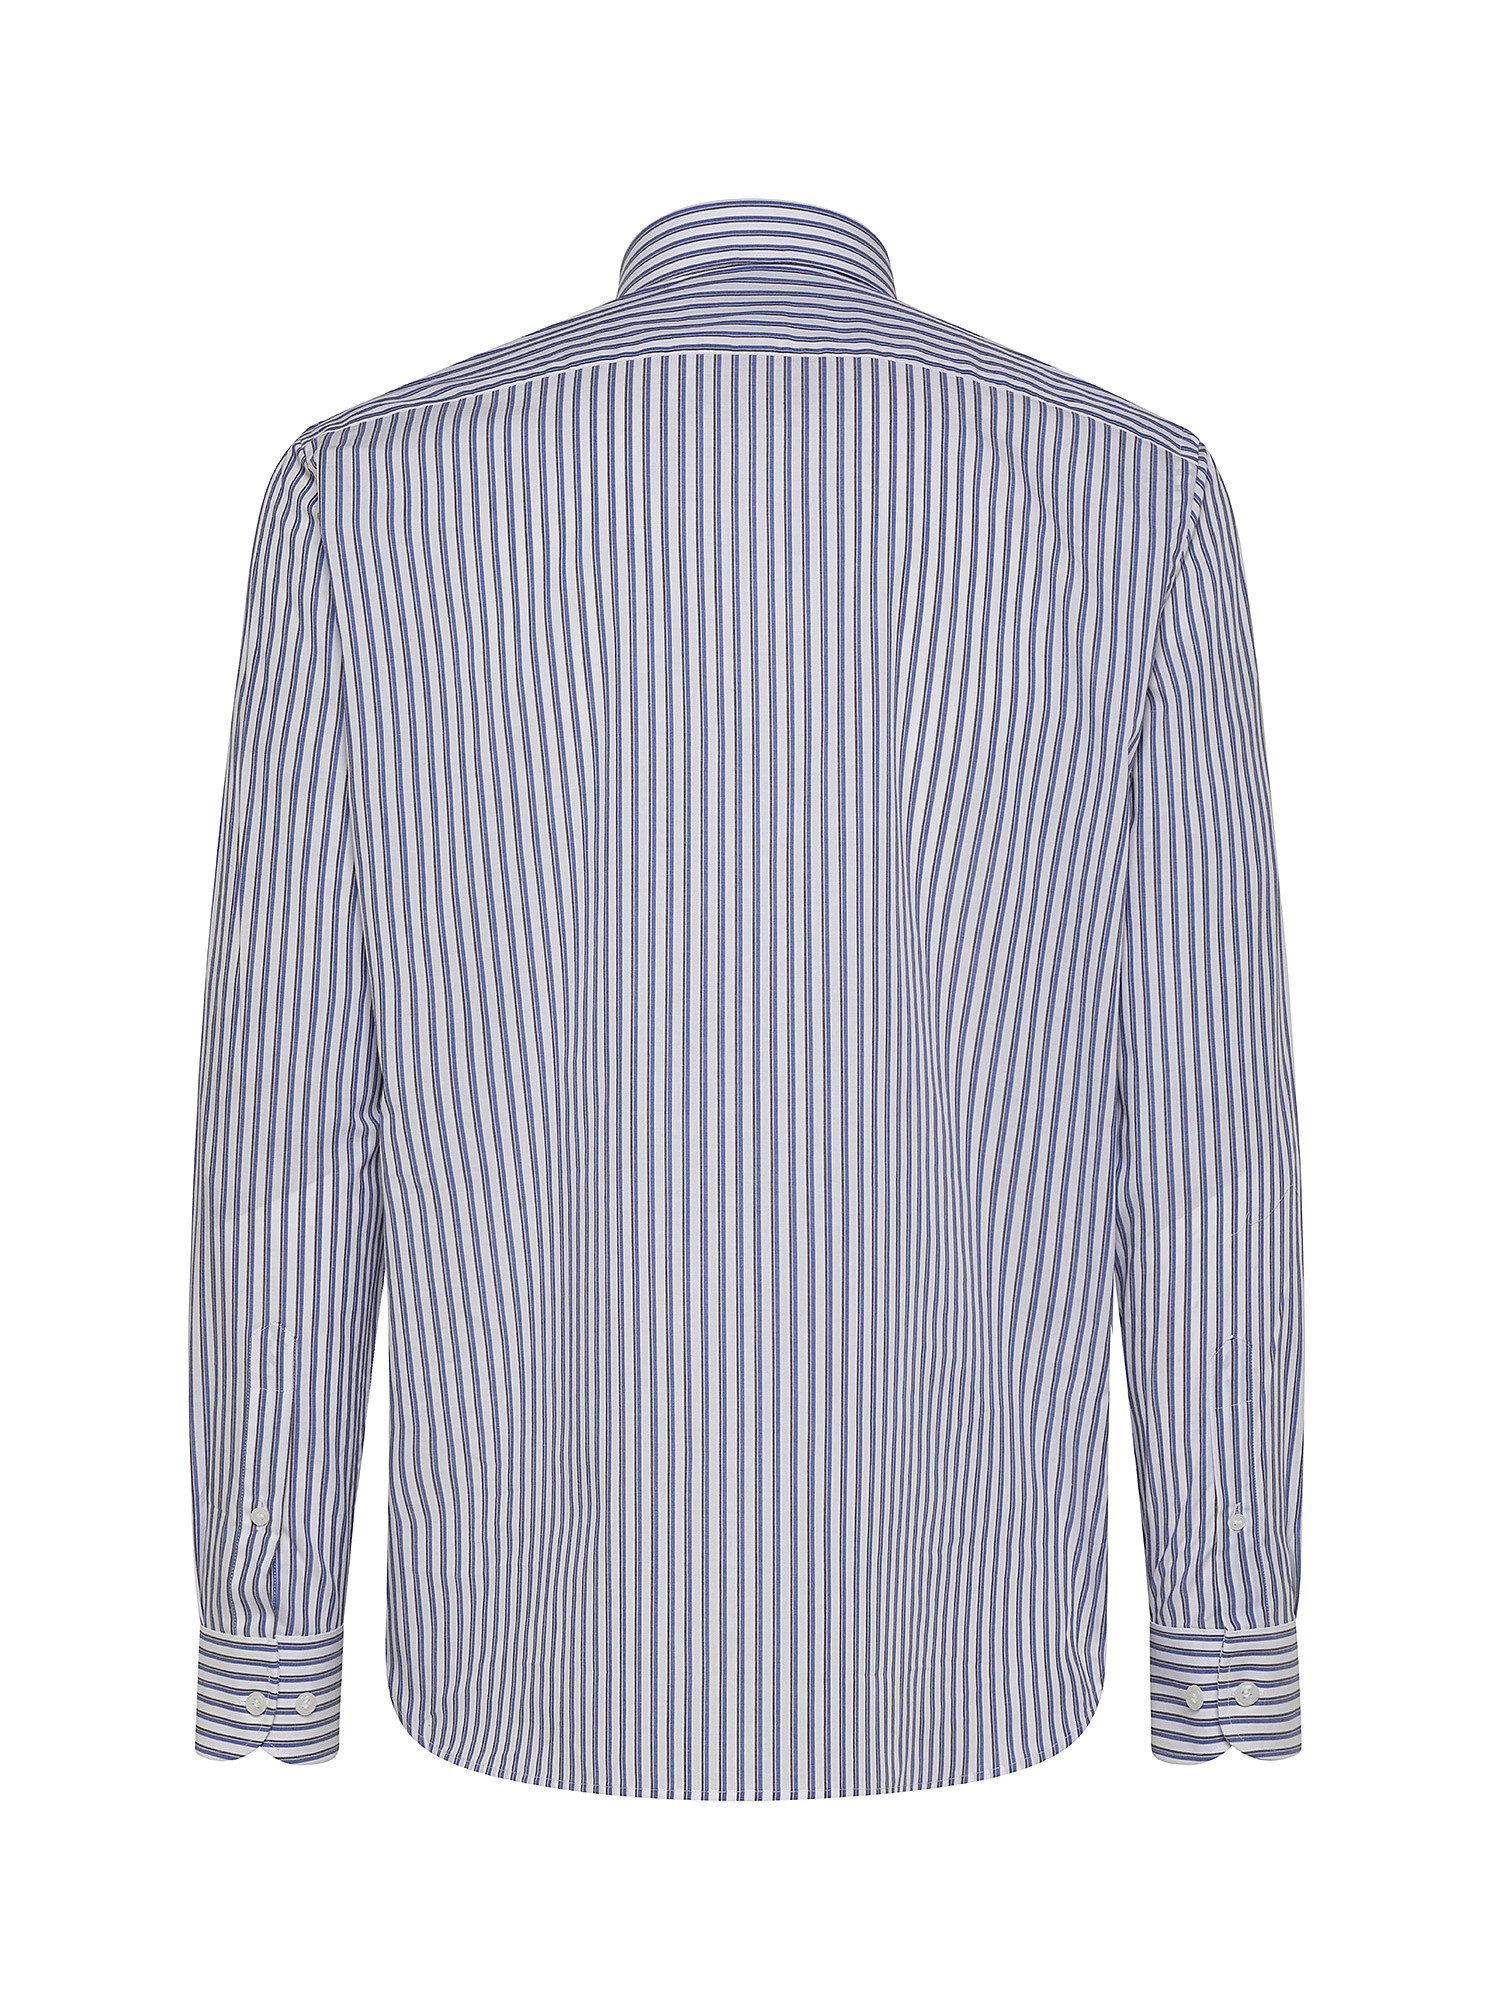 Tailor fit shirt in striped poplin cotton, Multicolor, large image number 1